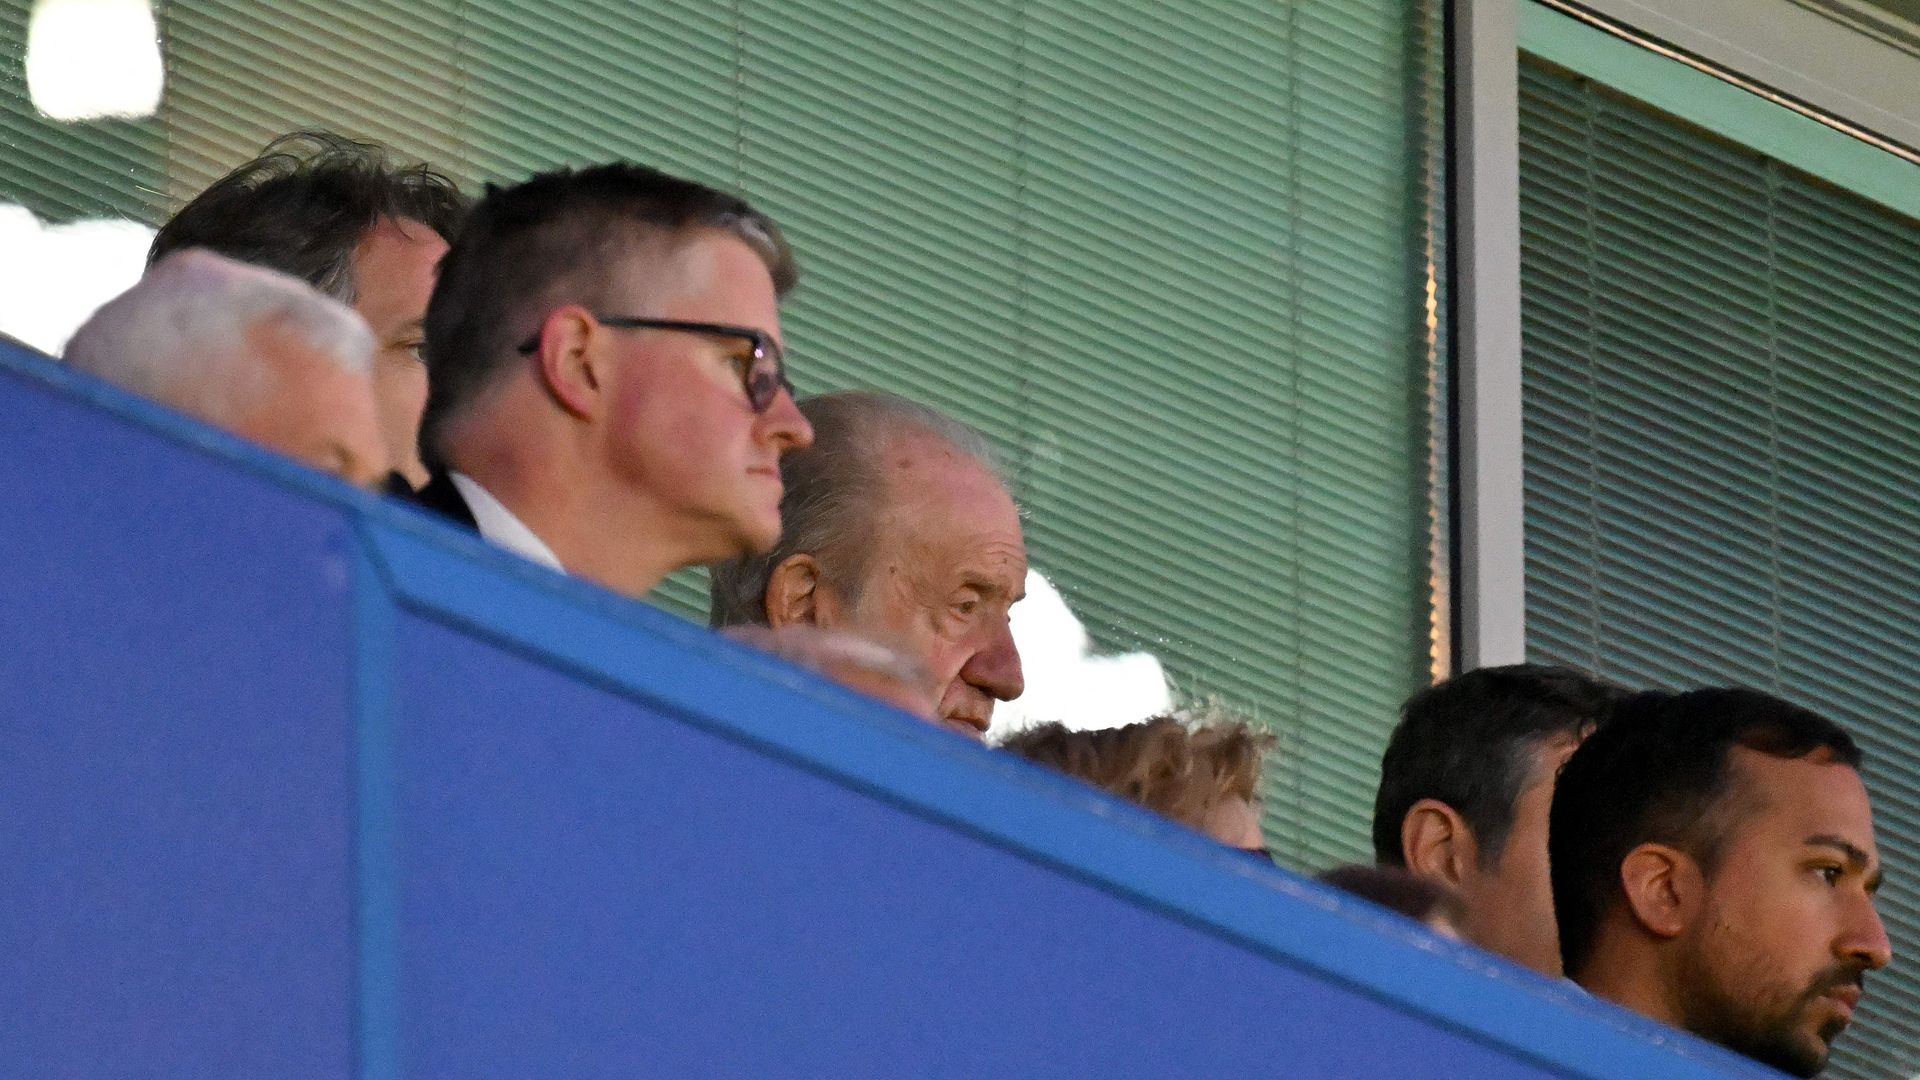 Juan Carlos attended the Champions League final in London on Tuesday